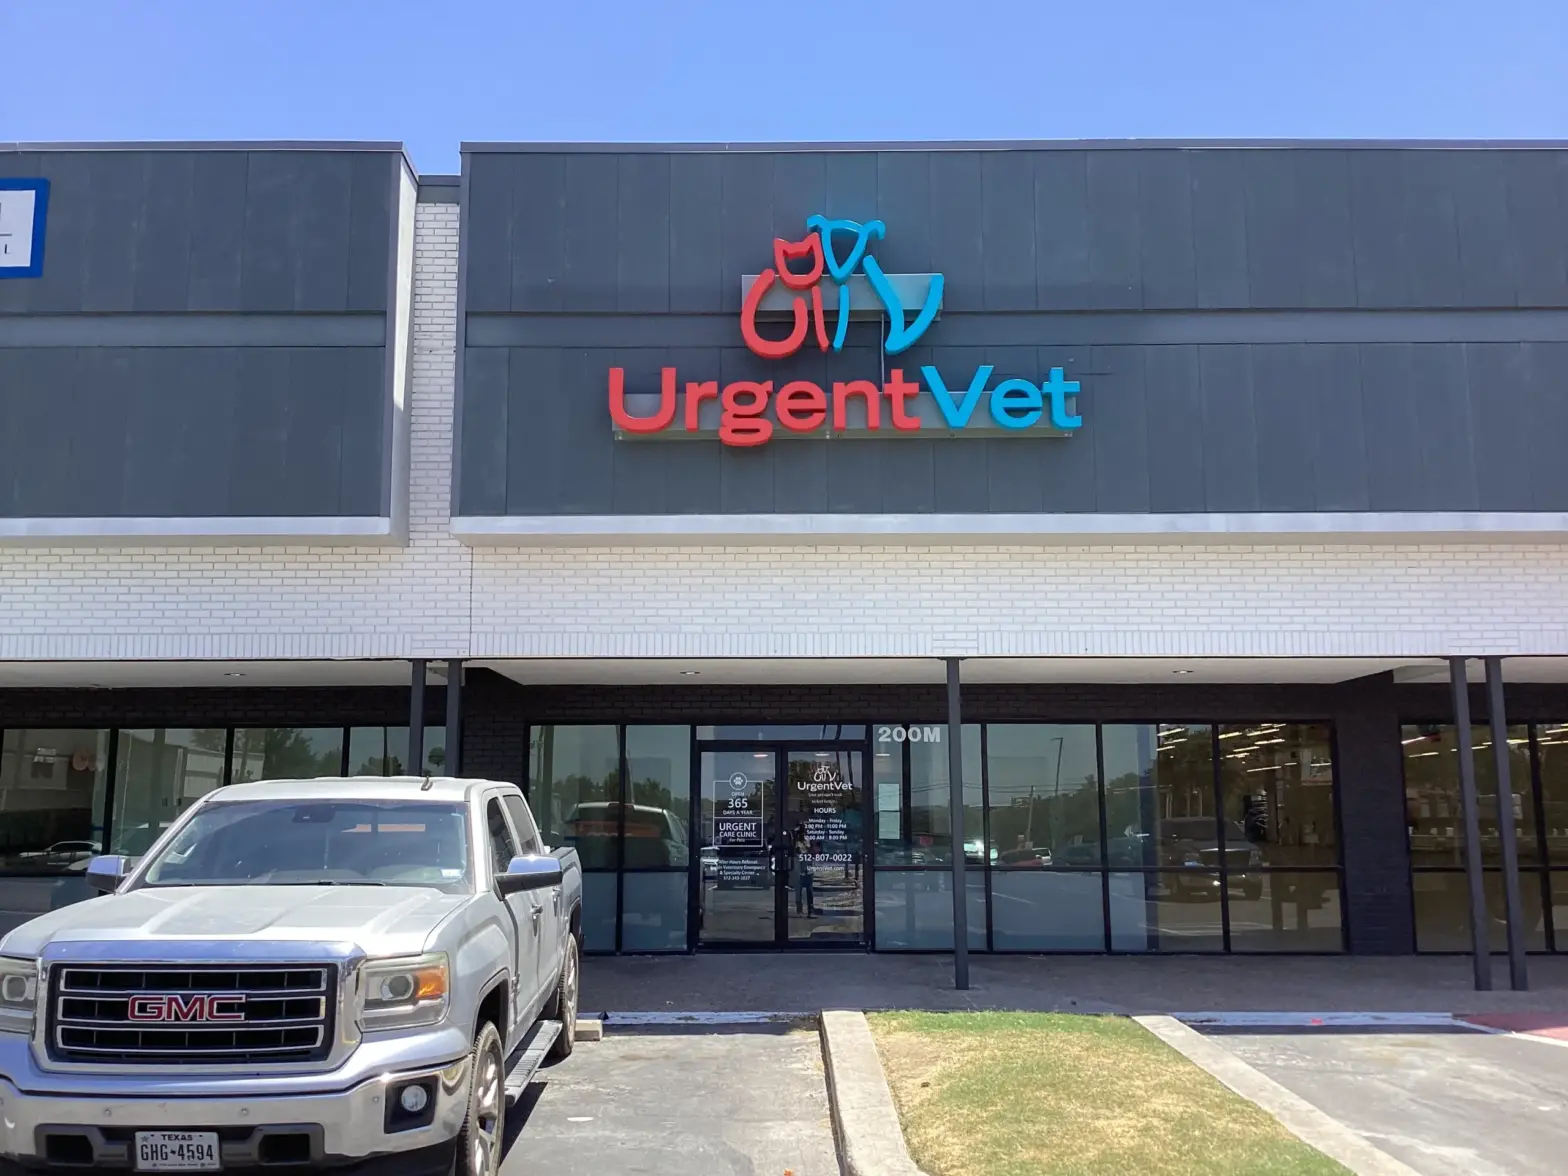 Featured image for post: After-Hours Pet Care Options in Austin Expand with the Addition of UrgentVet – Crestview